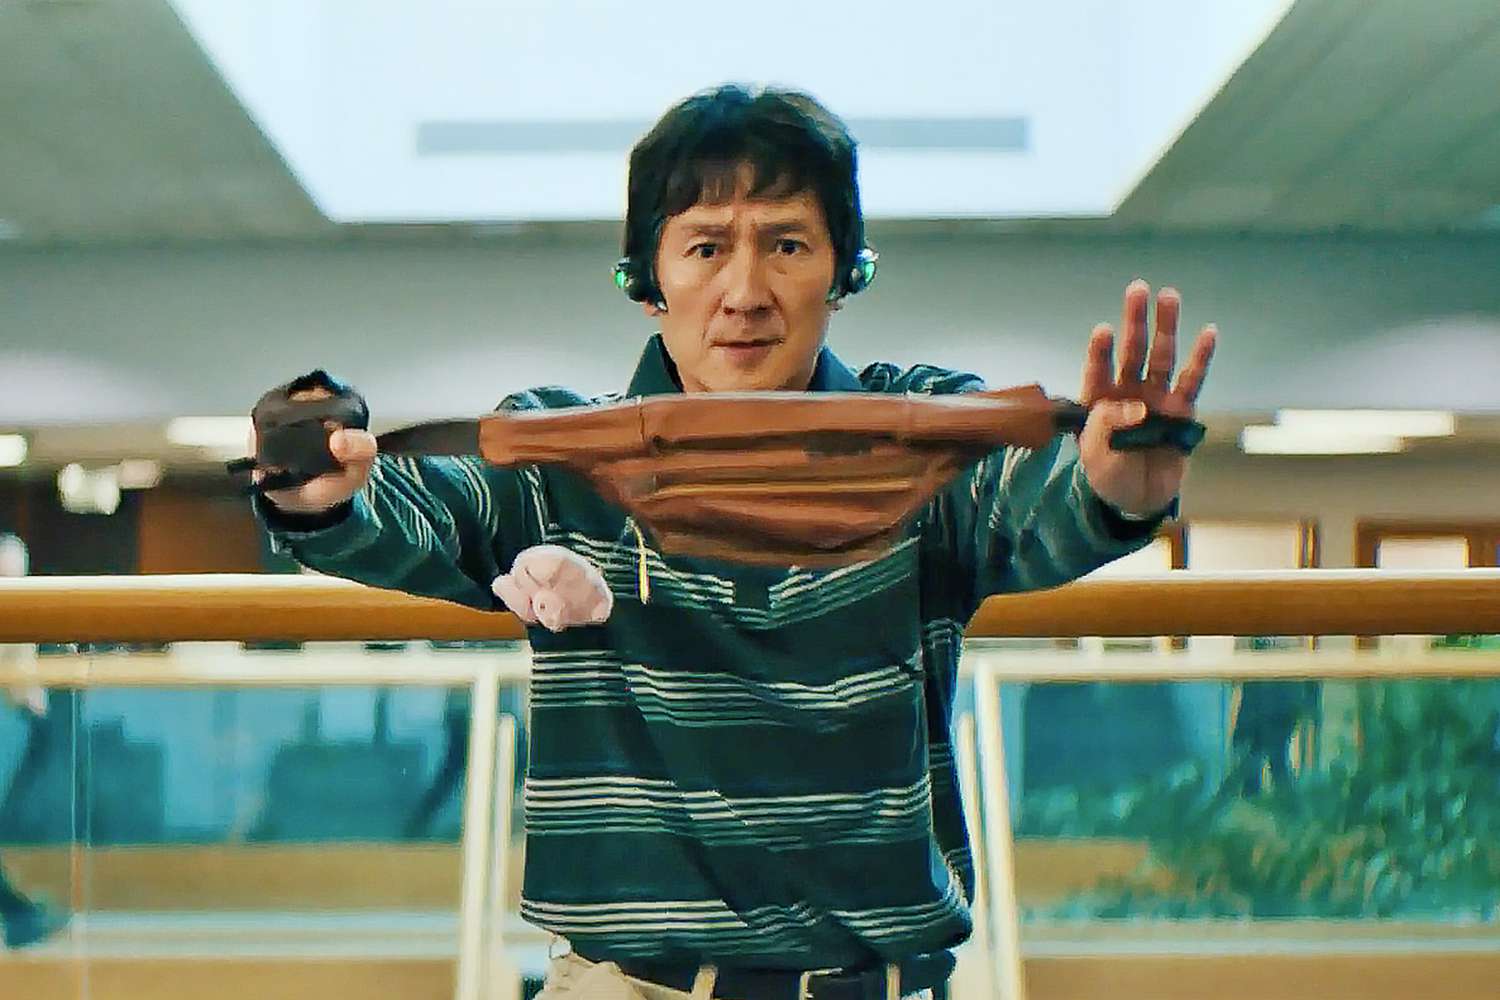 Watch Goonies star Ke Huy Quan win a fight with a fanny pack in Everything  Everywhere clip | EW.com